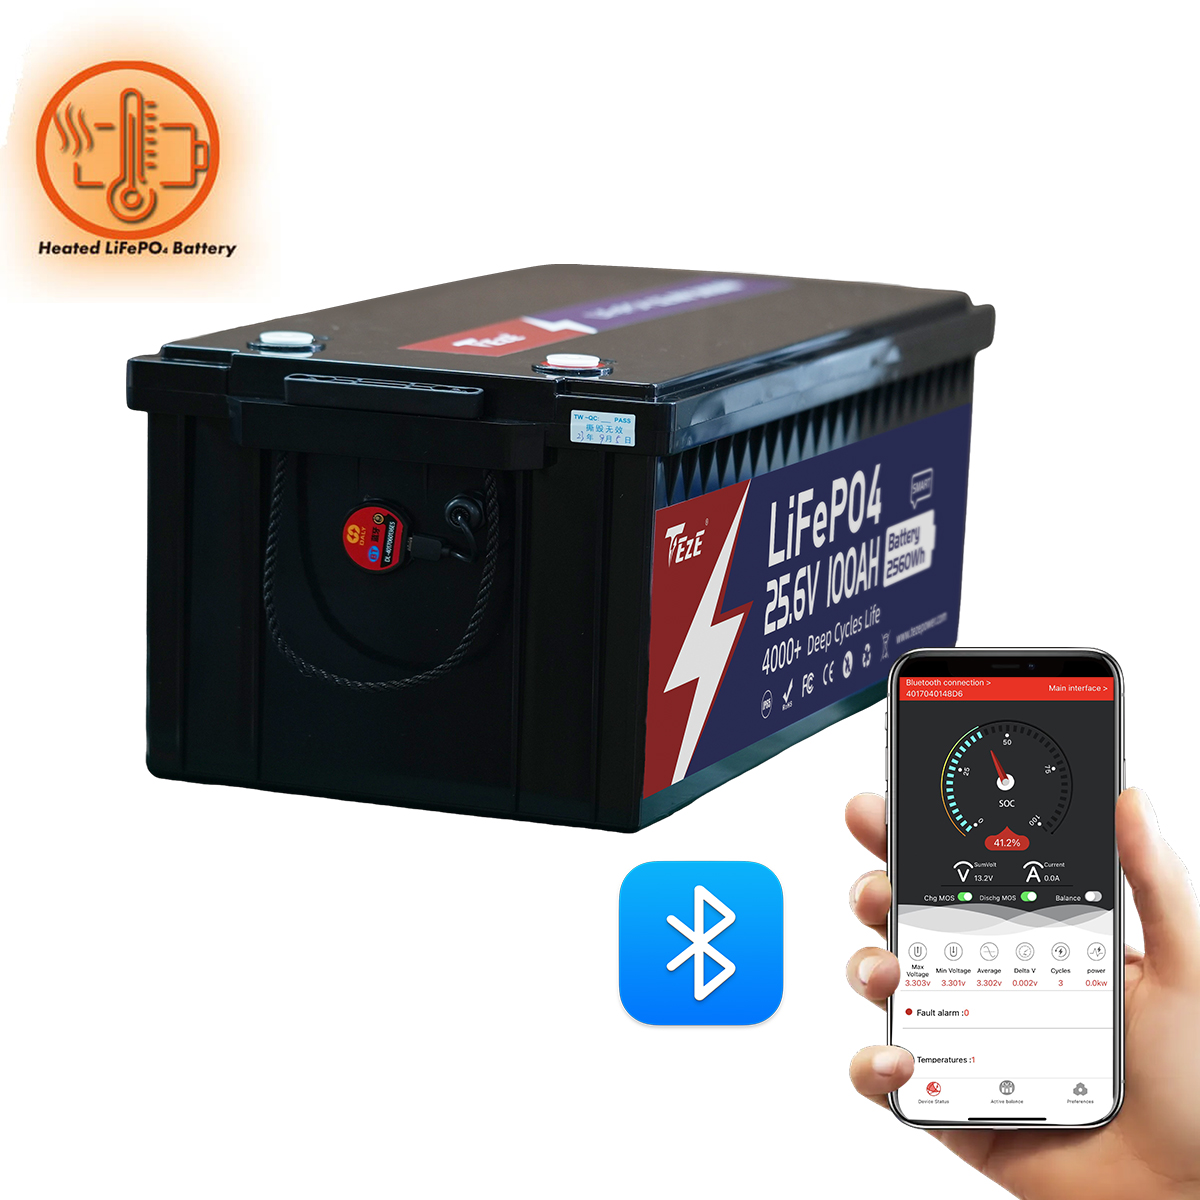 NEW-TezePower 24V100Ah LiFePO4 Battery with Bluetooth, Self-heating and Active Balancer, Built-in 100A Daly BMS (Bluetooth External Version)